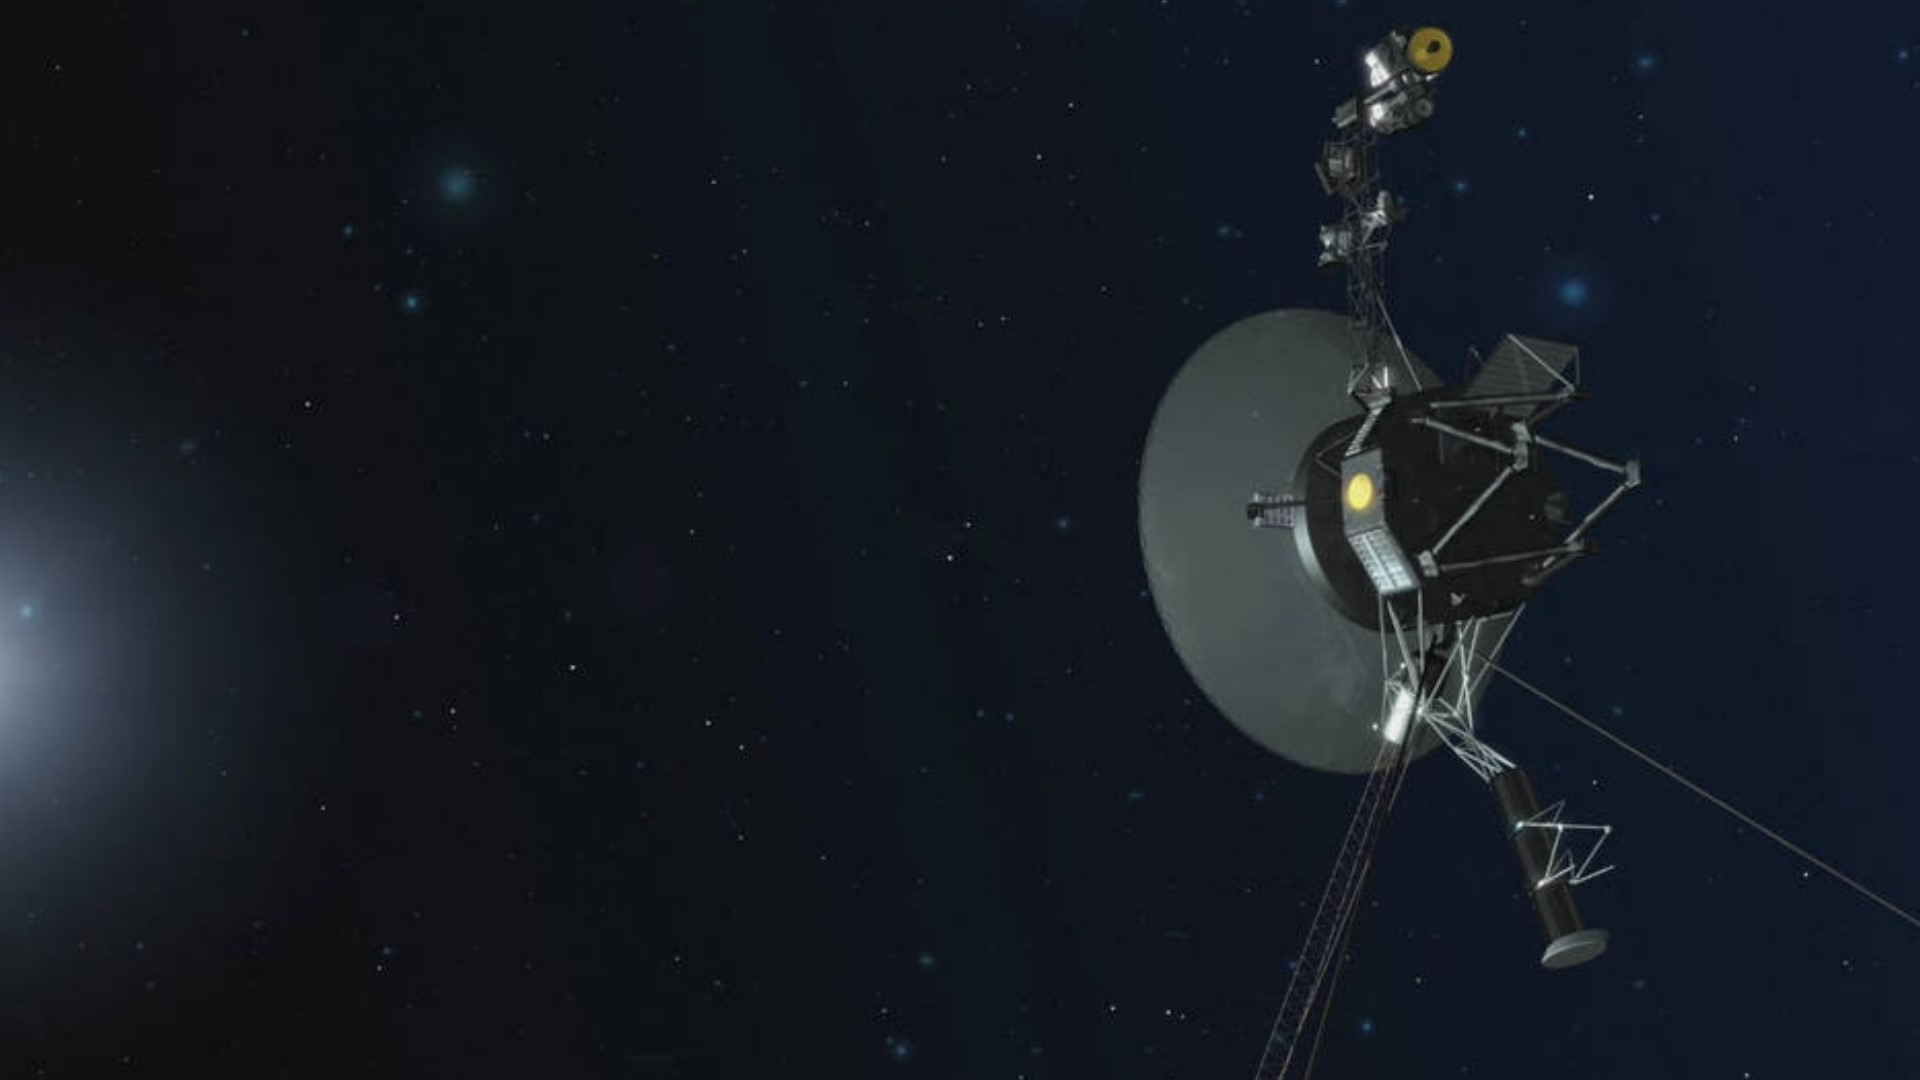 Launched in 1977, Voyager 1 is more than 15 billion miles away in interstellar space.